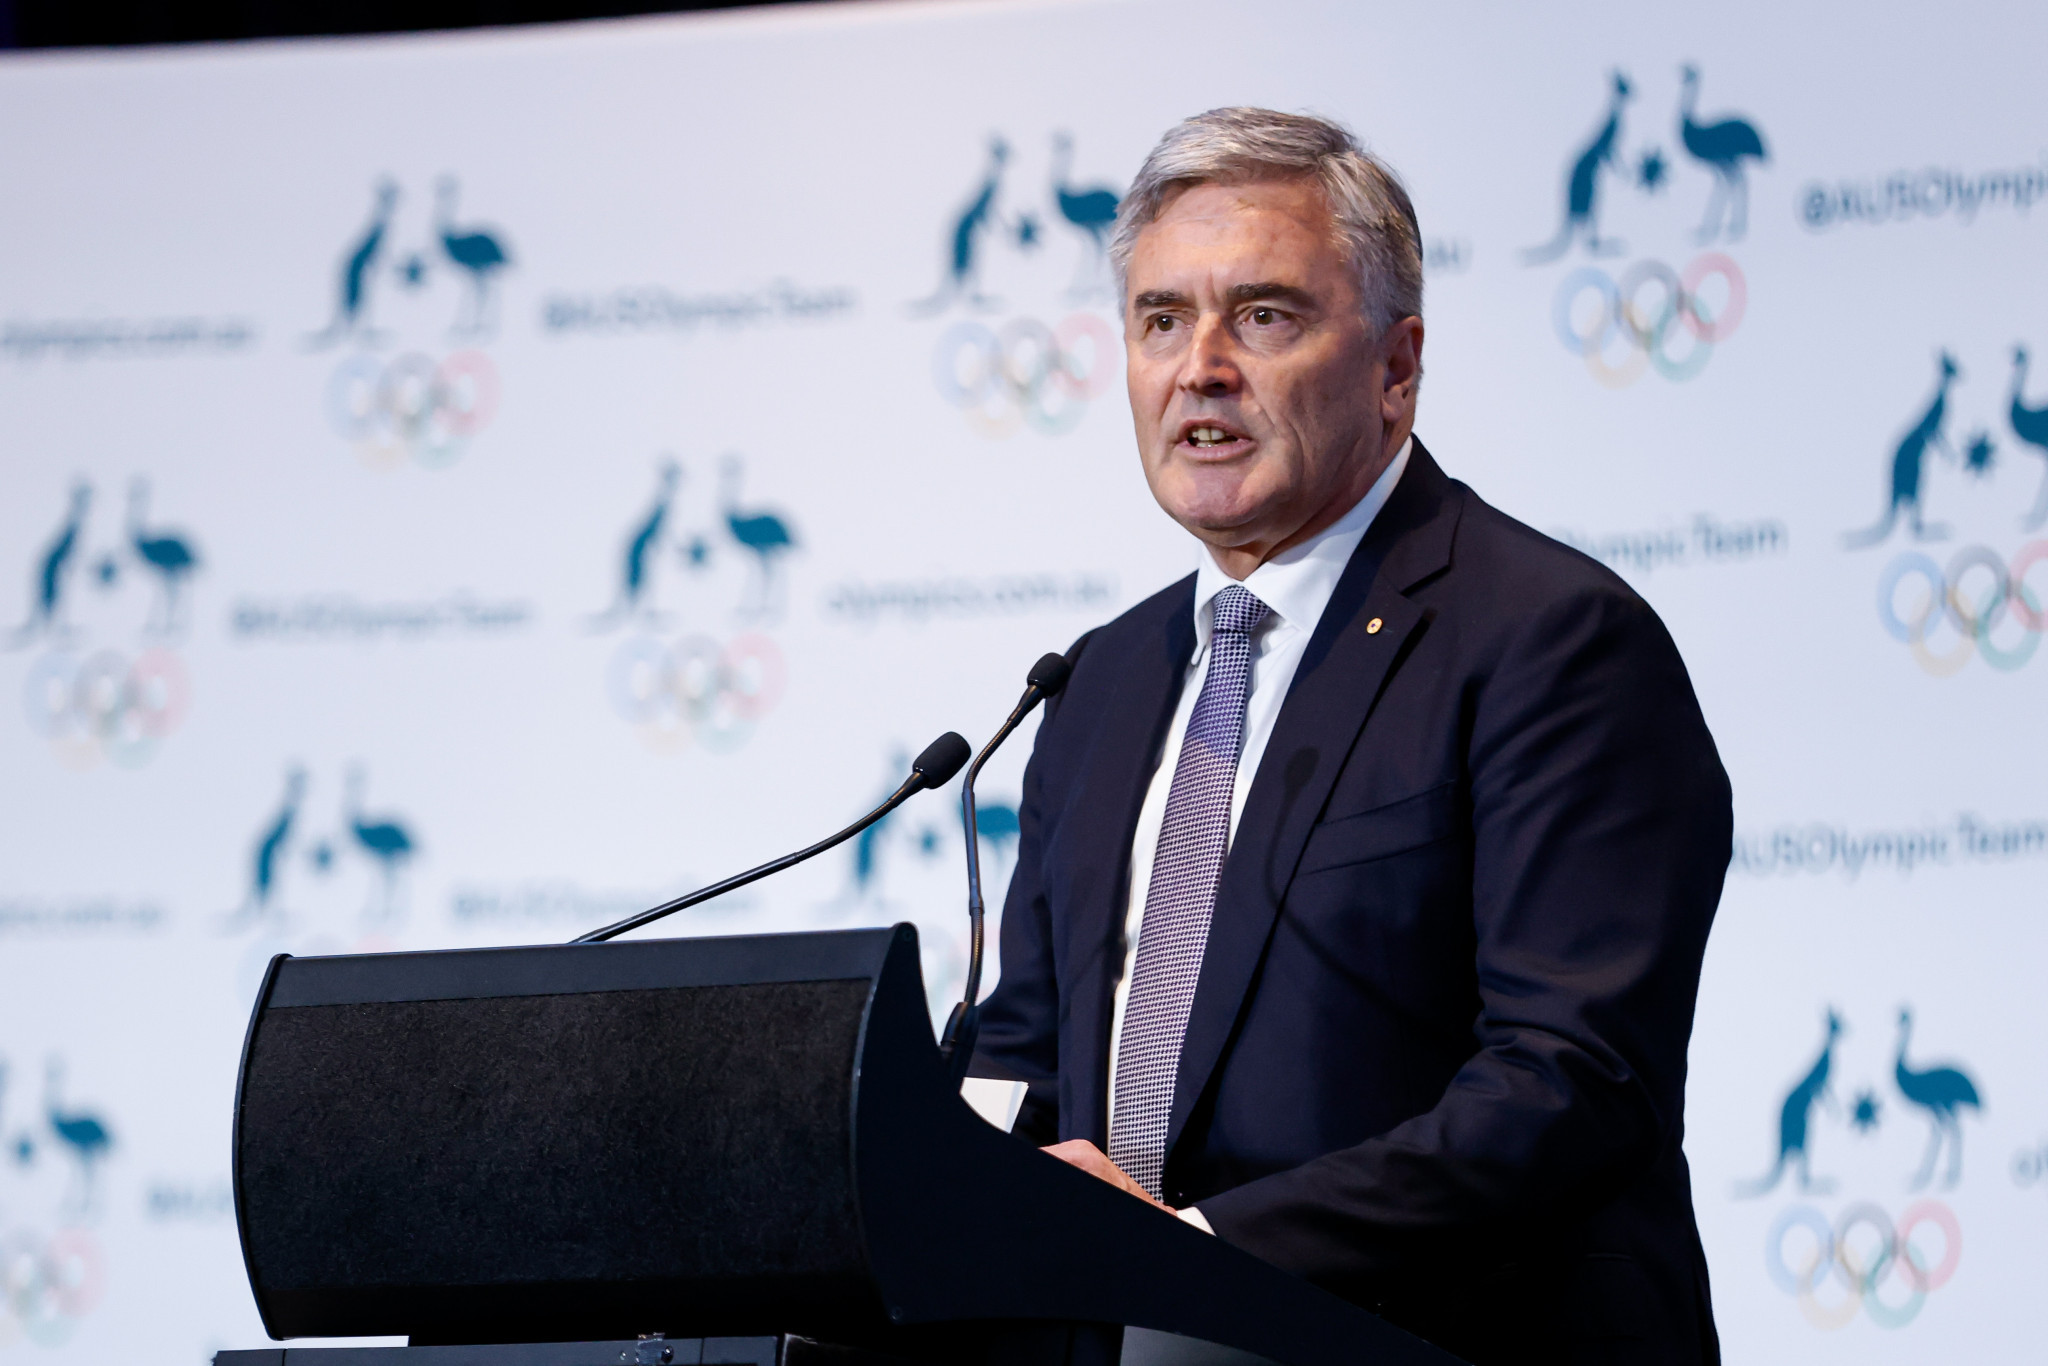 Chesterman succeeds Coates as President of Australian Olympic Committee